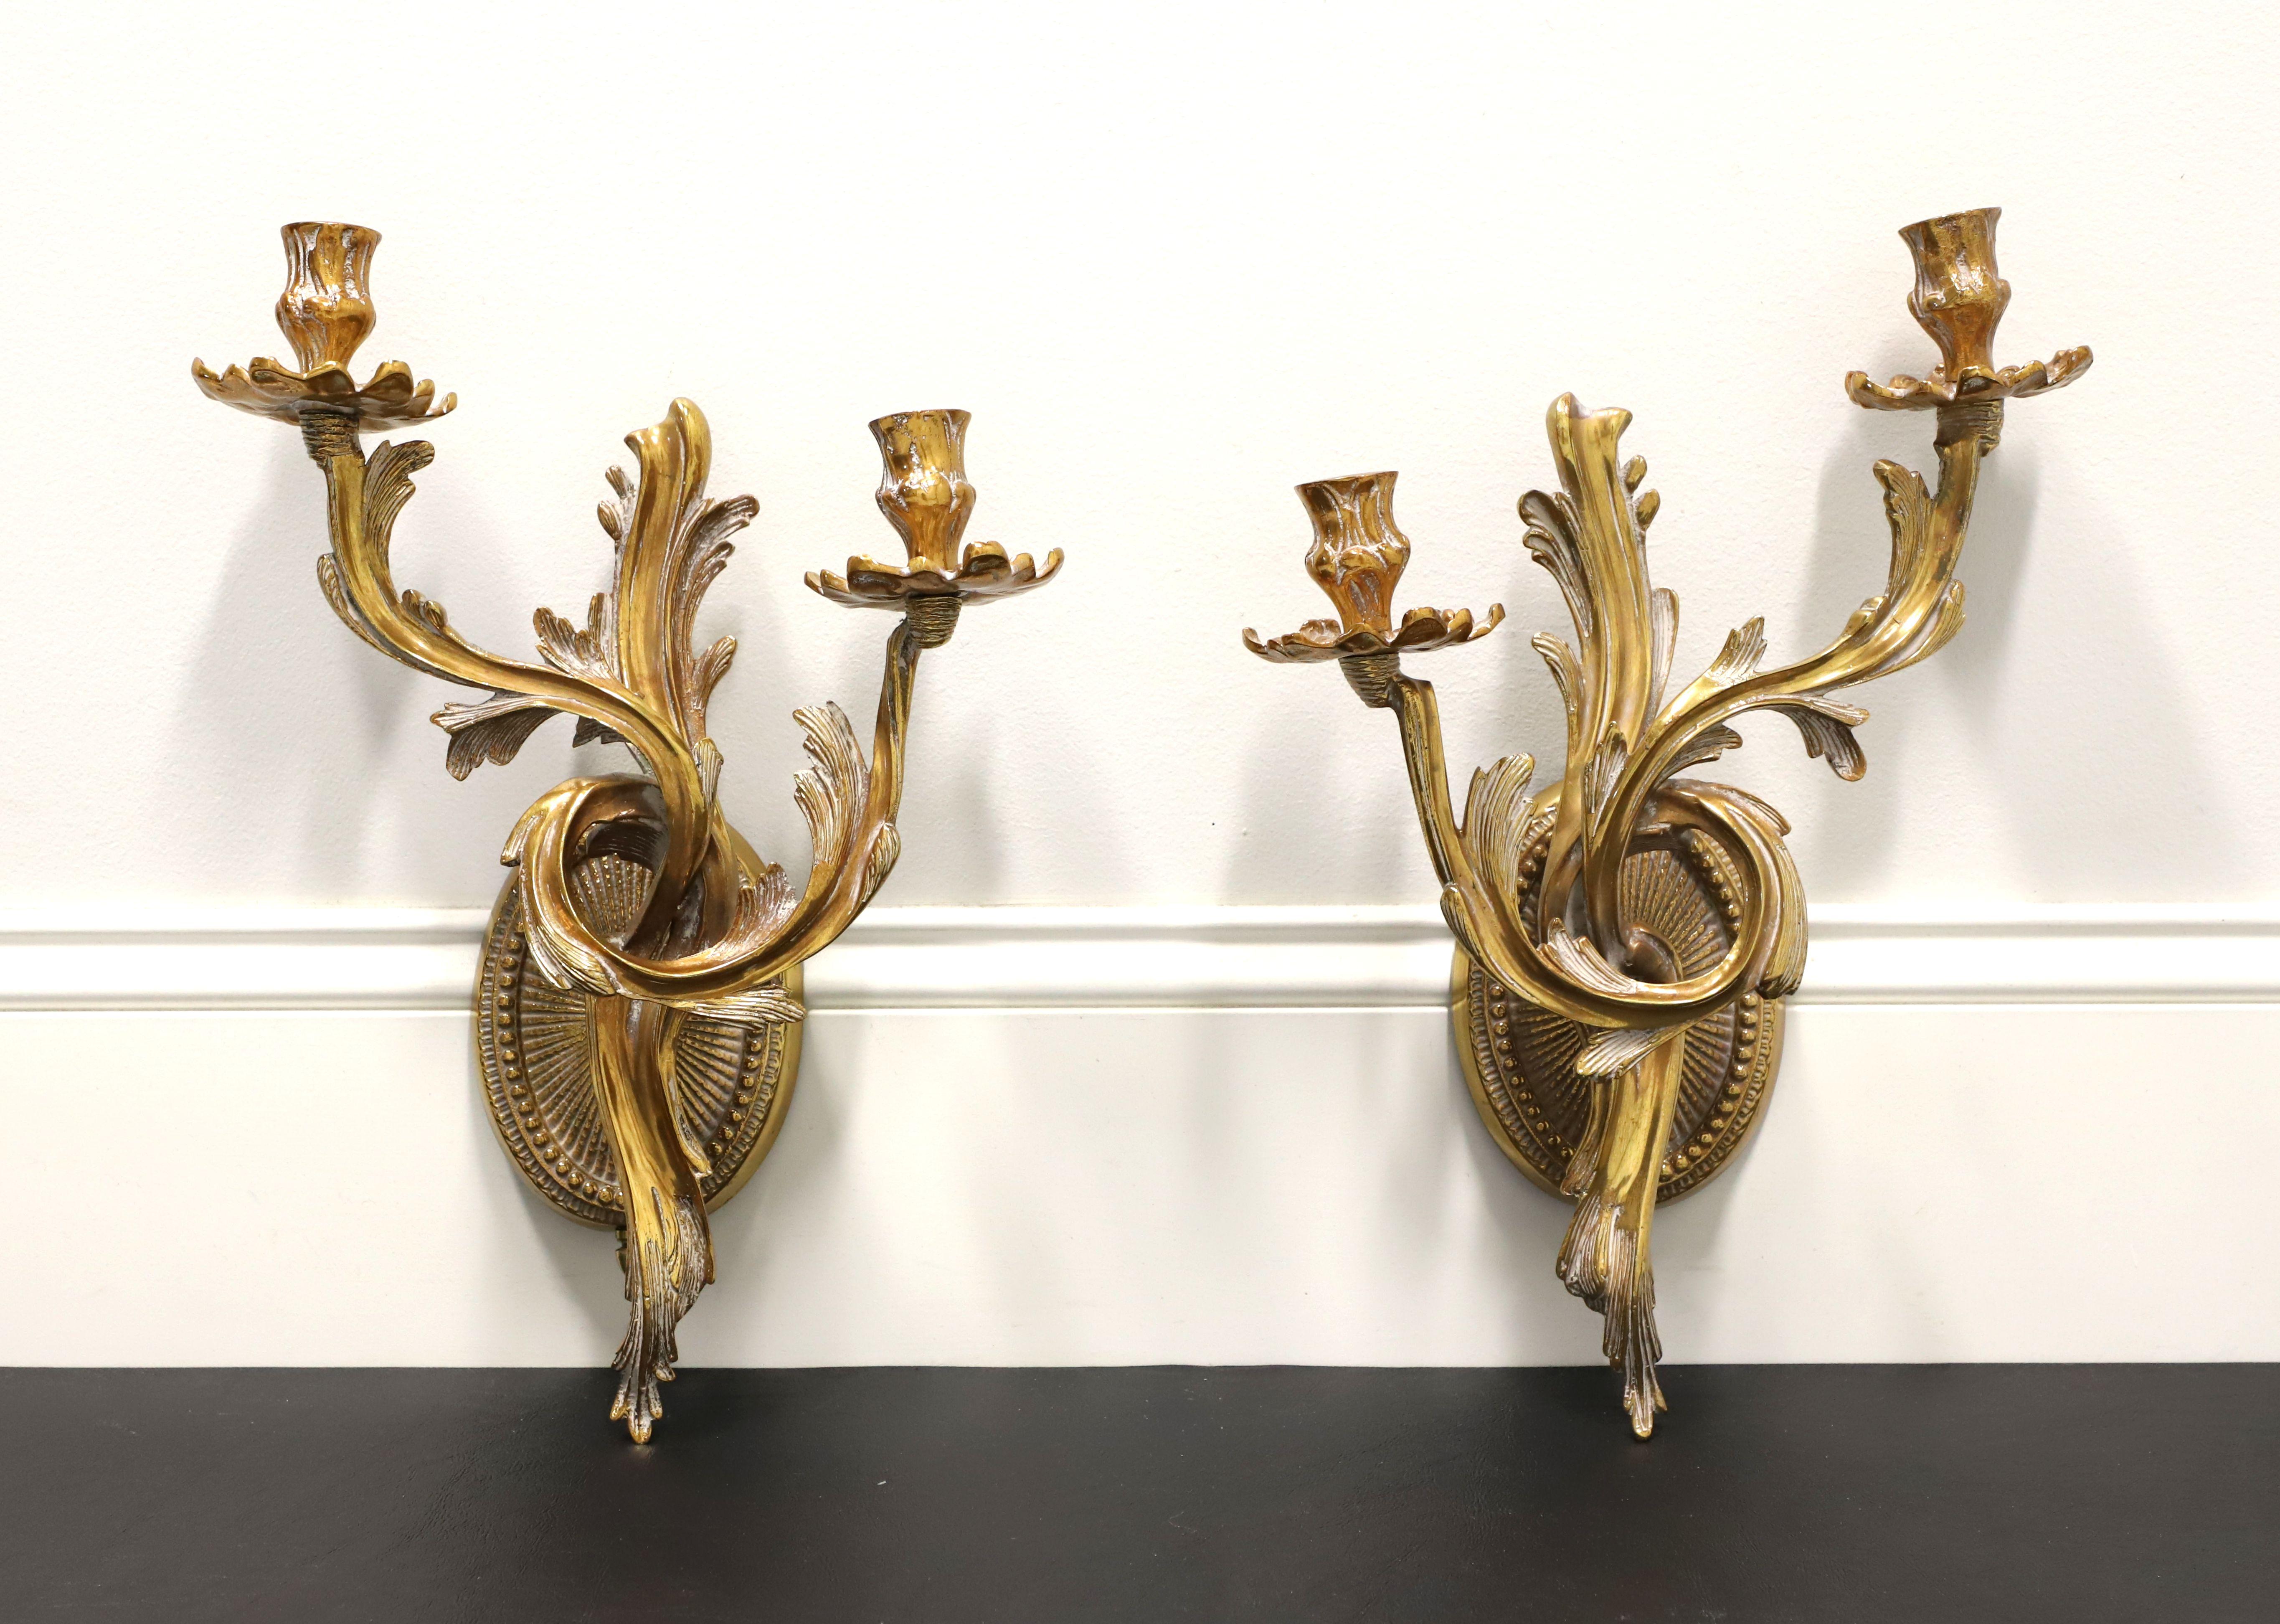 FREDERICK COOPER Solid Brass Rococo Style Candle Wall Sconces - Pair For Sale 5